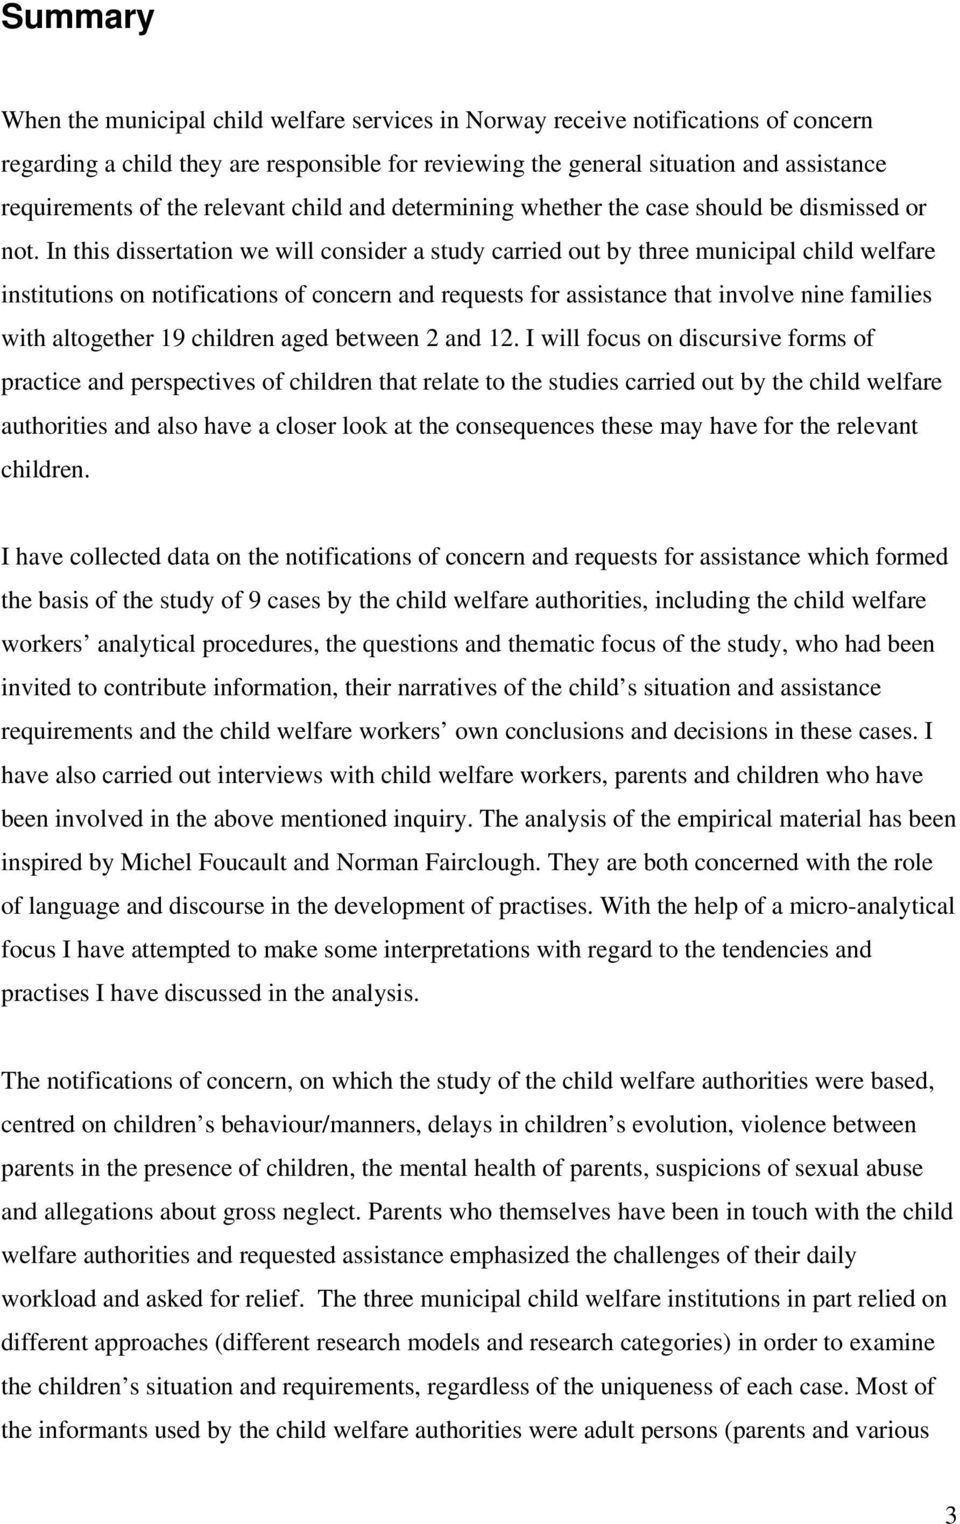 In this dissertation we will consider a study carried out by three municipal child welfare institutions on notifications of concern and requests for assistance that involve nine families with